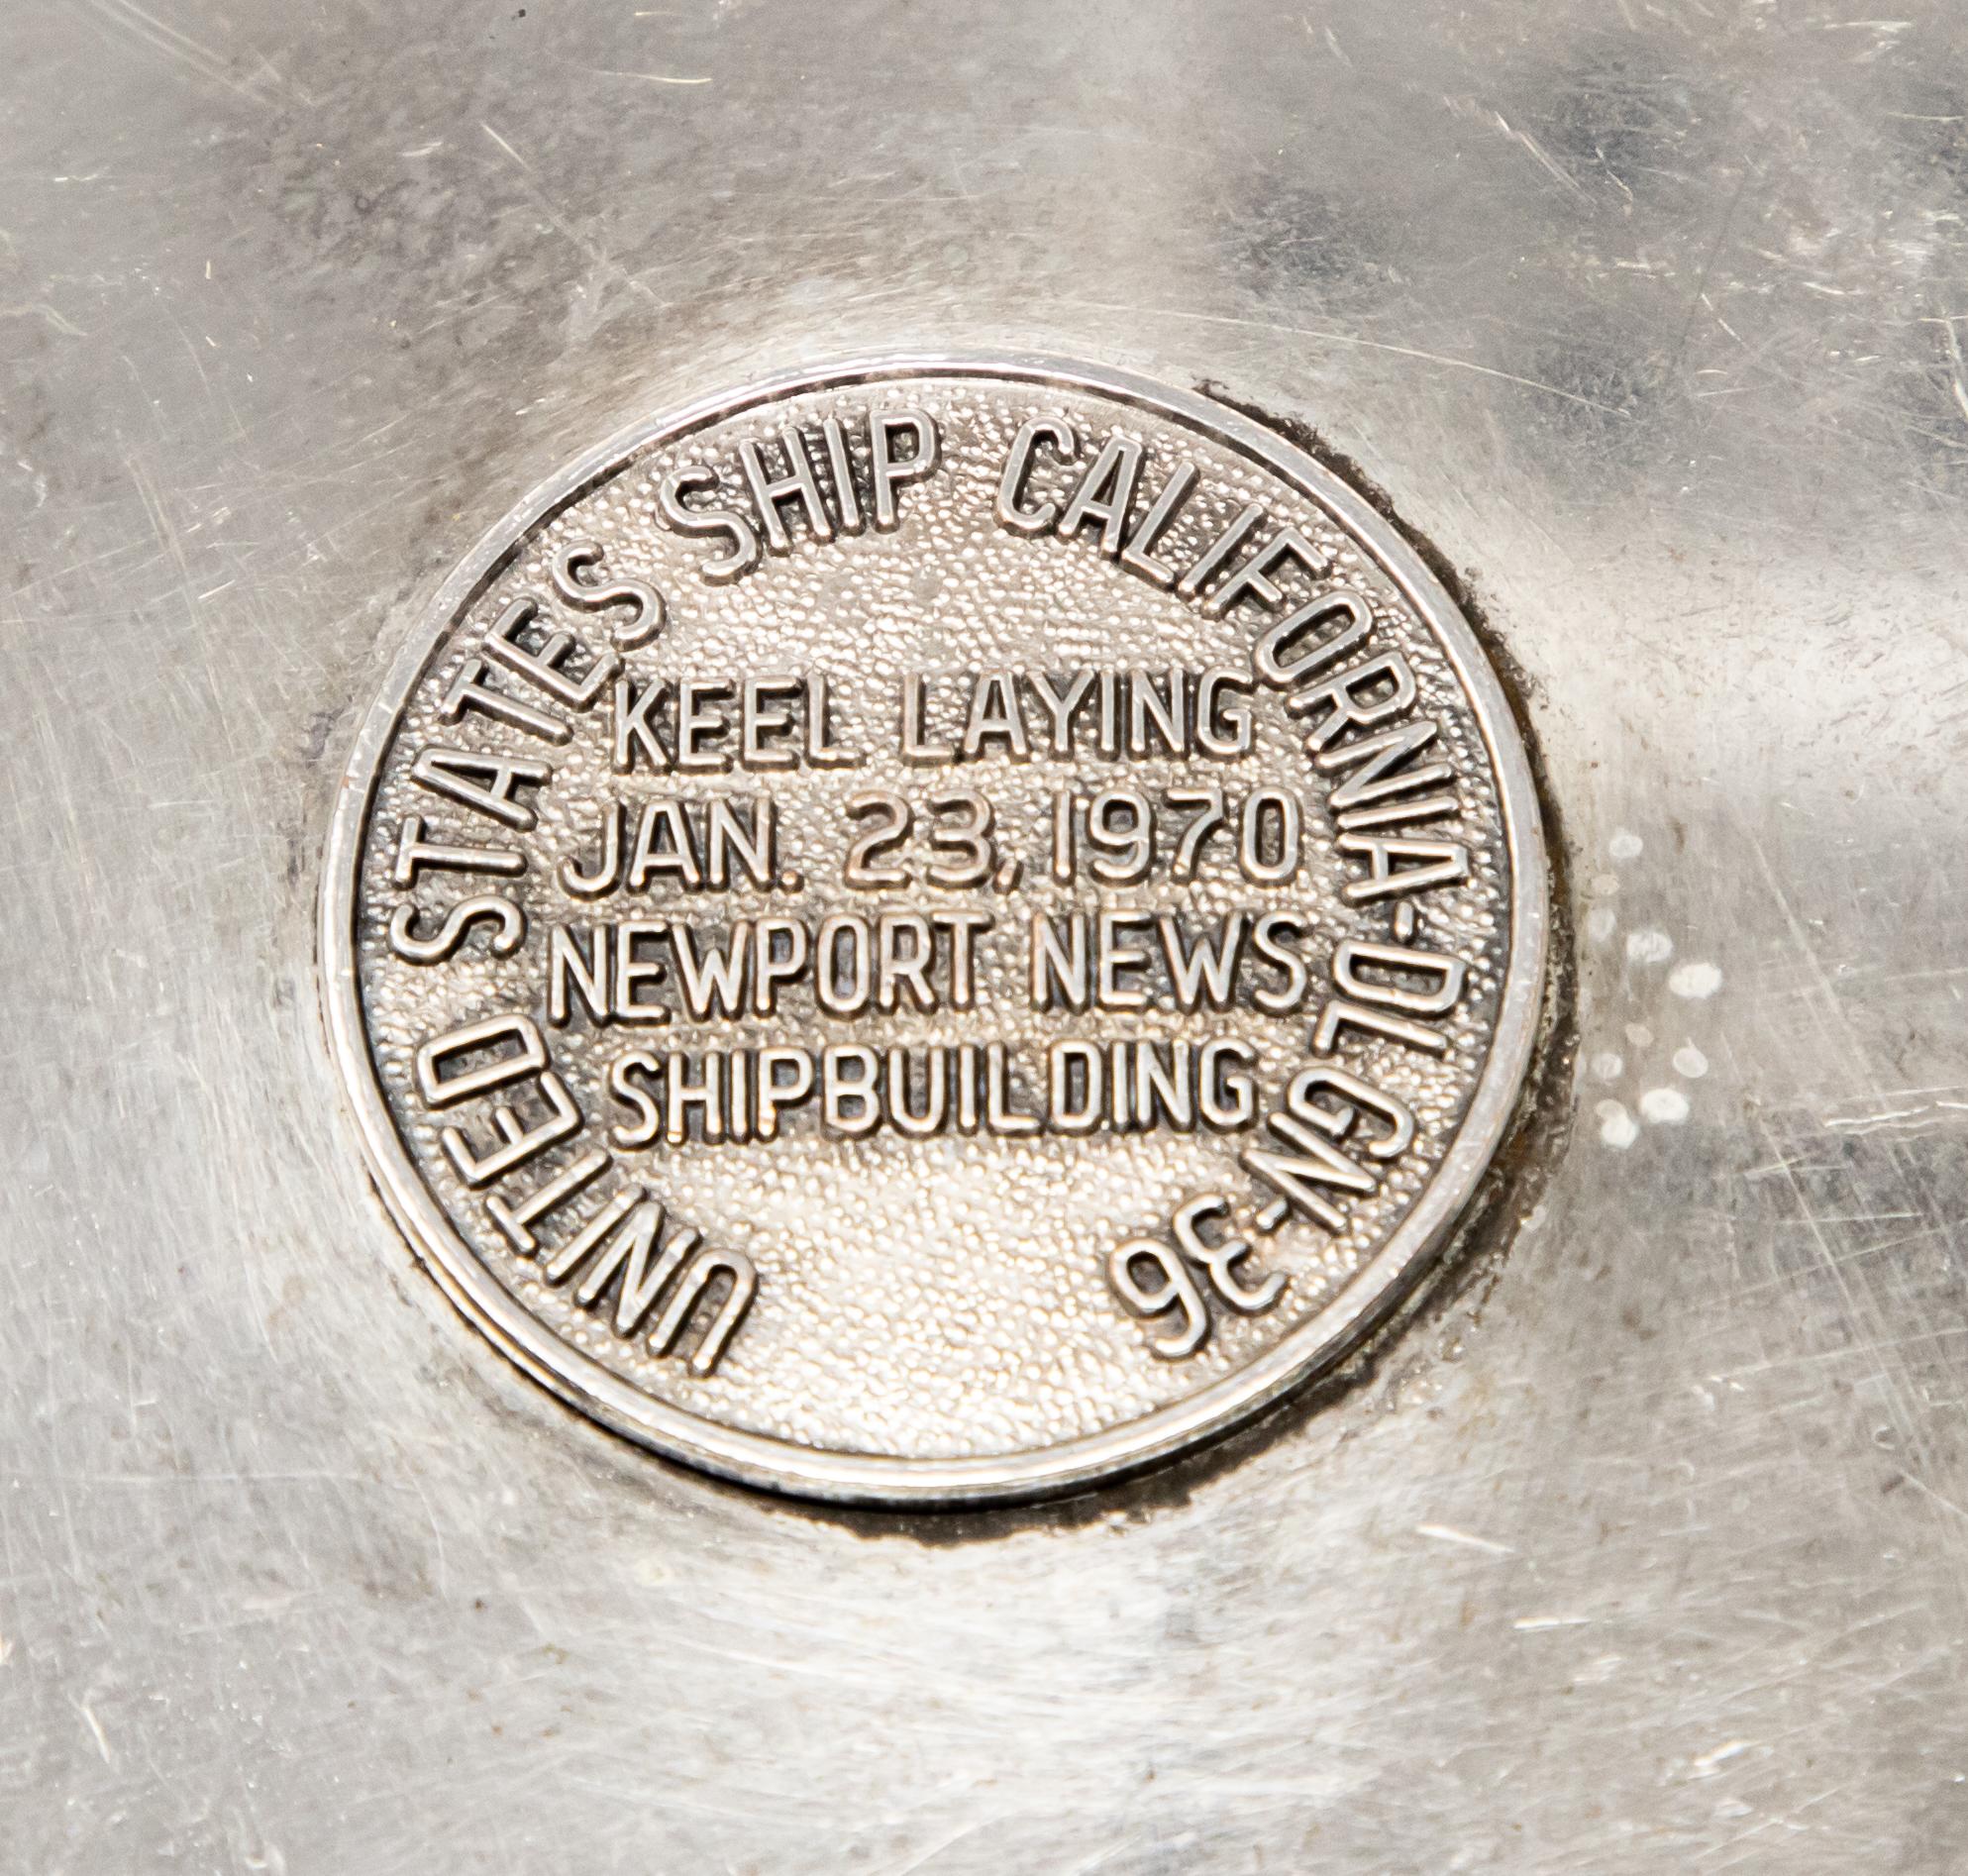 Offering this beautiful silver plate plaque by William A Rogers and Co. The Medallion in the middle is marked United States Ship California- DLGN-36 around the edge. The center has the name Keel Laying, Jan 23, 1970, Newport News, Shipbuilding. The